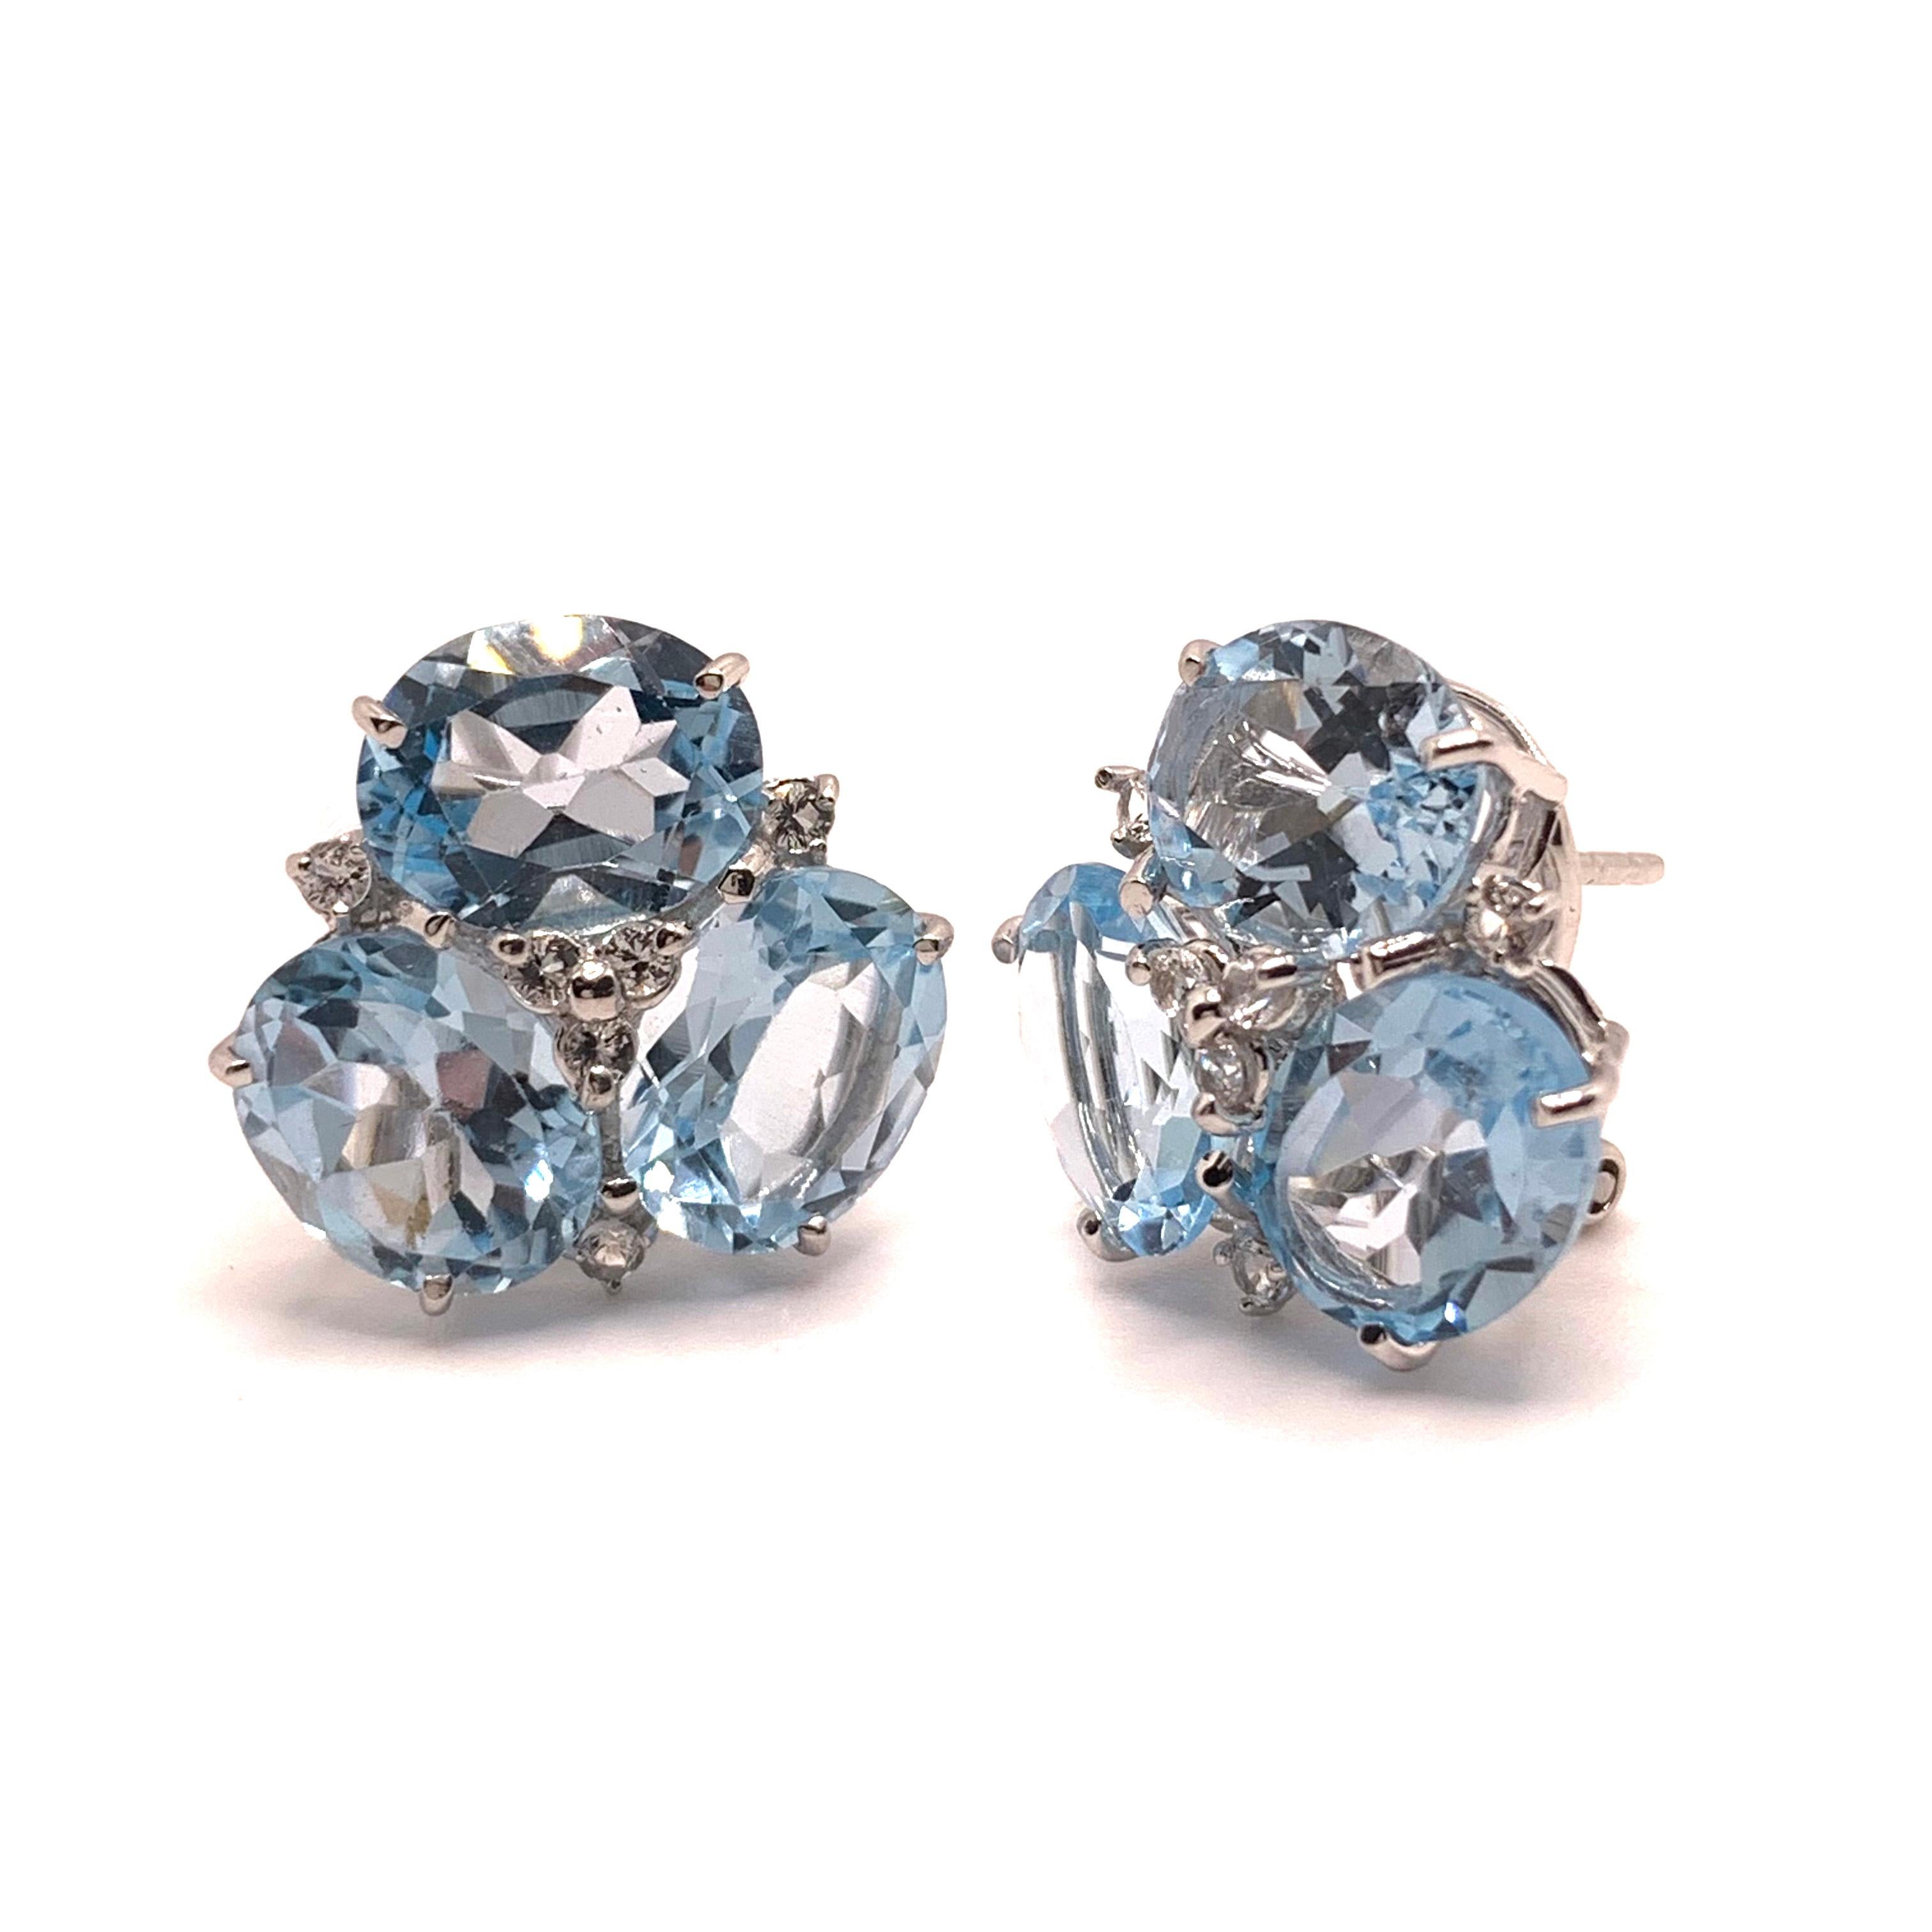 These stunning pair of earrings feature sets of oval genuine sky blue topaz adorned with round white topaz, handset in platinum rhodium plated sterling silver. We love the soft blue topaz color - look like aquamarine and produce beautiful shiny